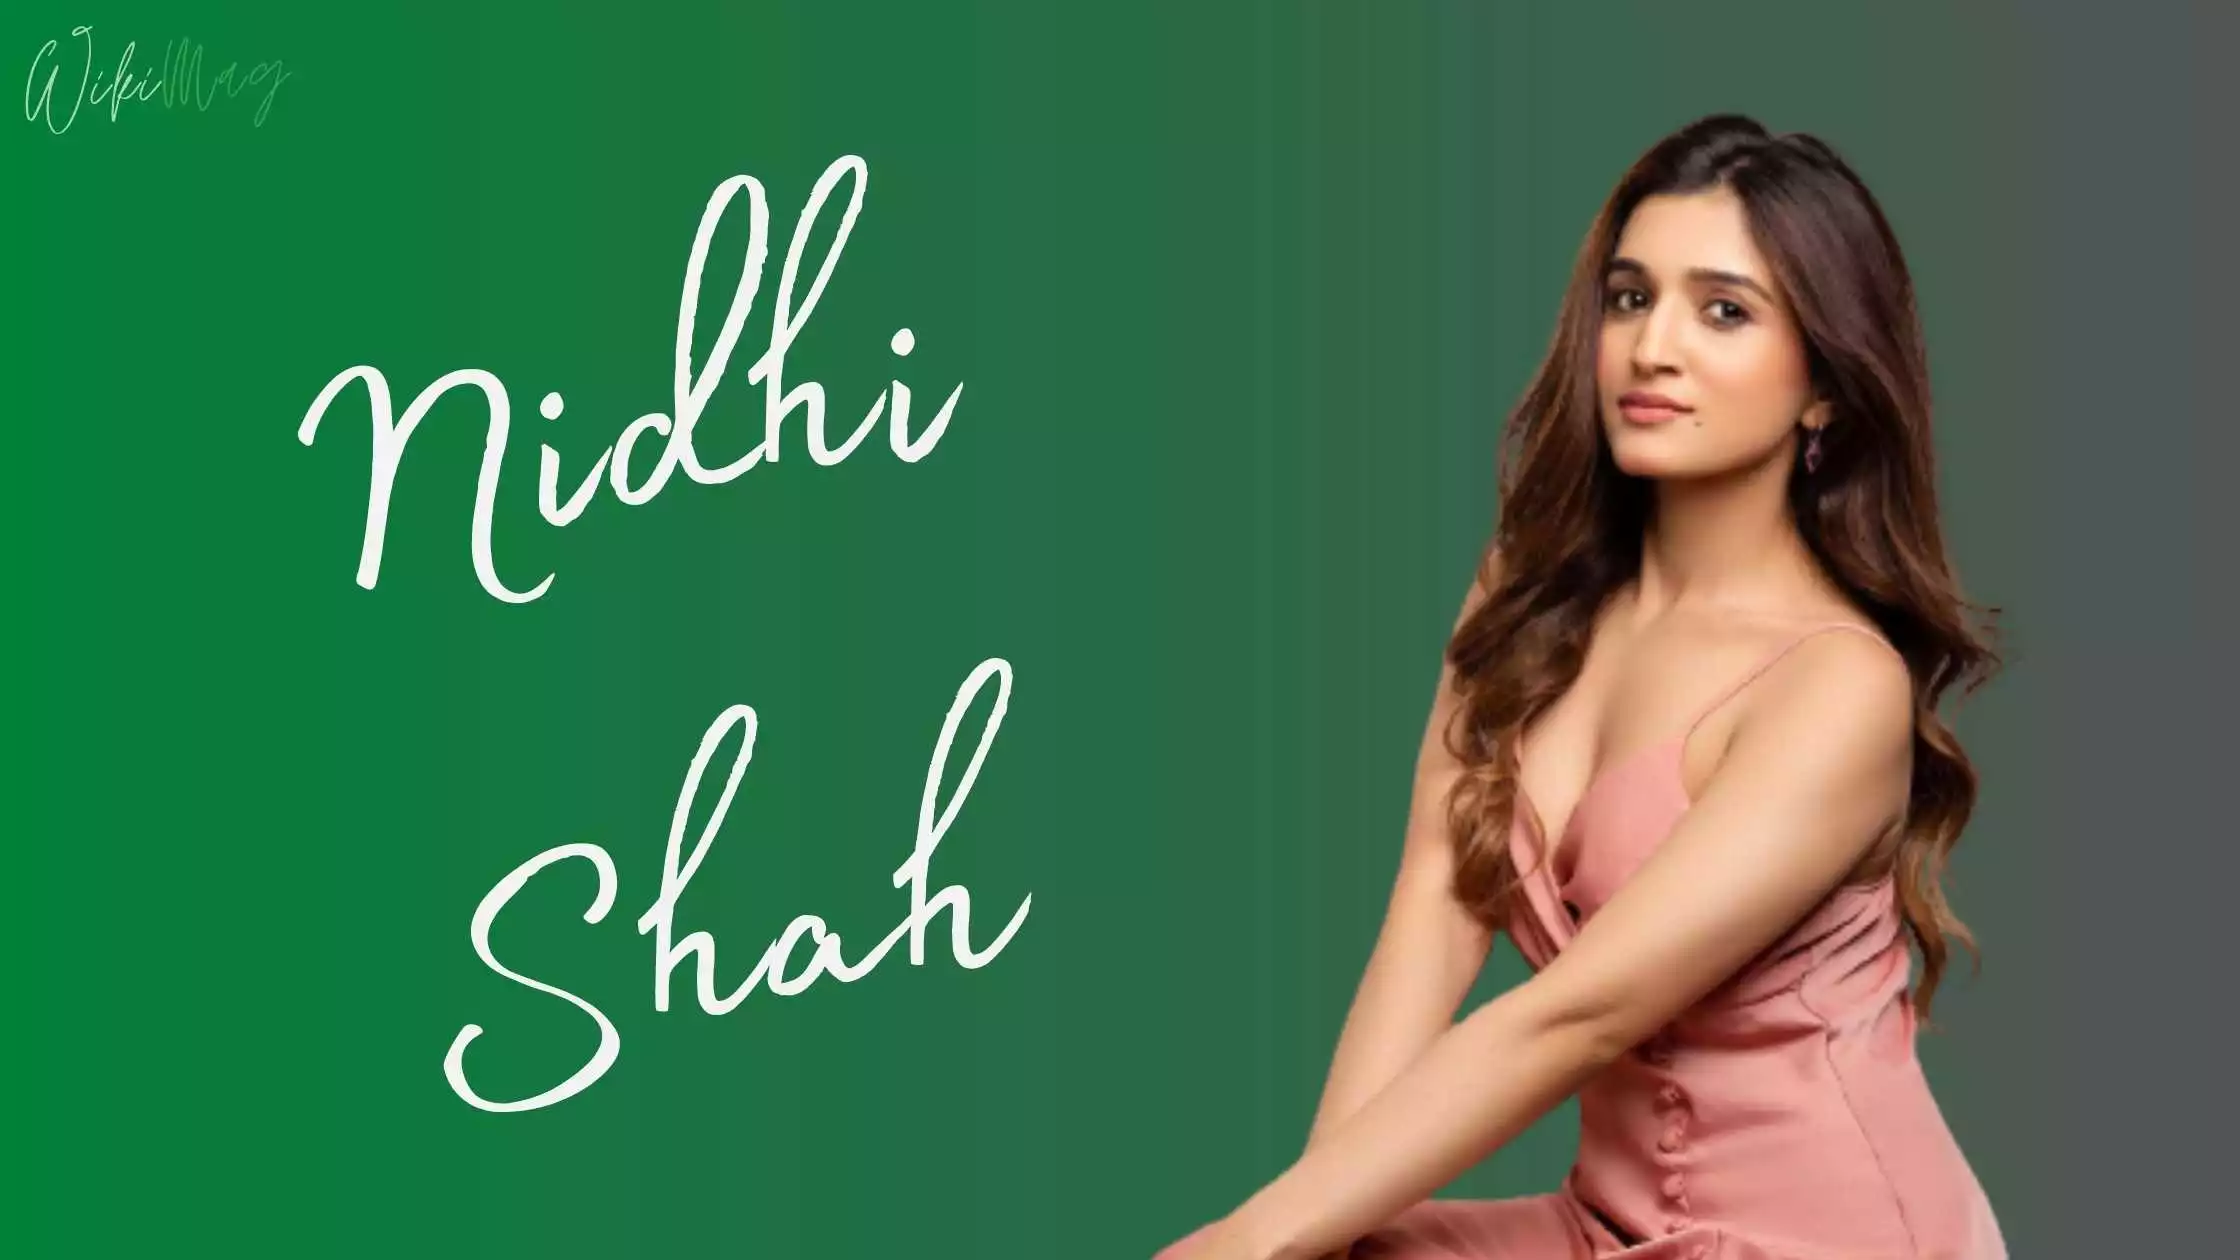 Nidhi Shah Wiki, Age, Height, Family, Net Worth, Biography & More